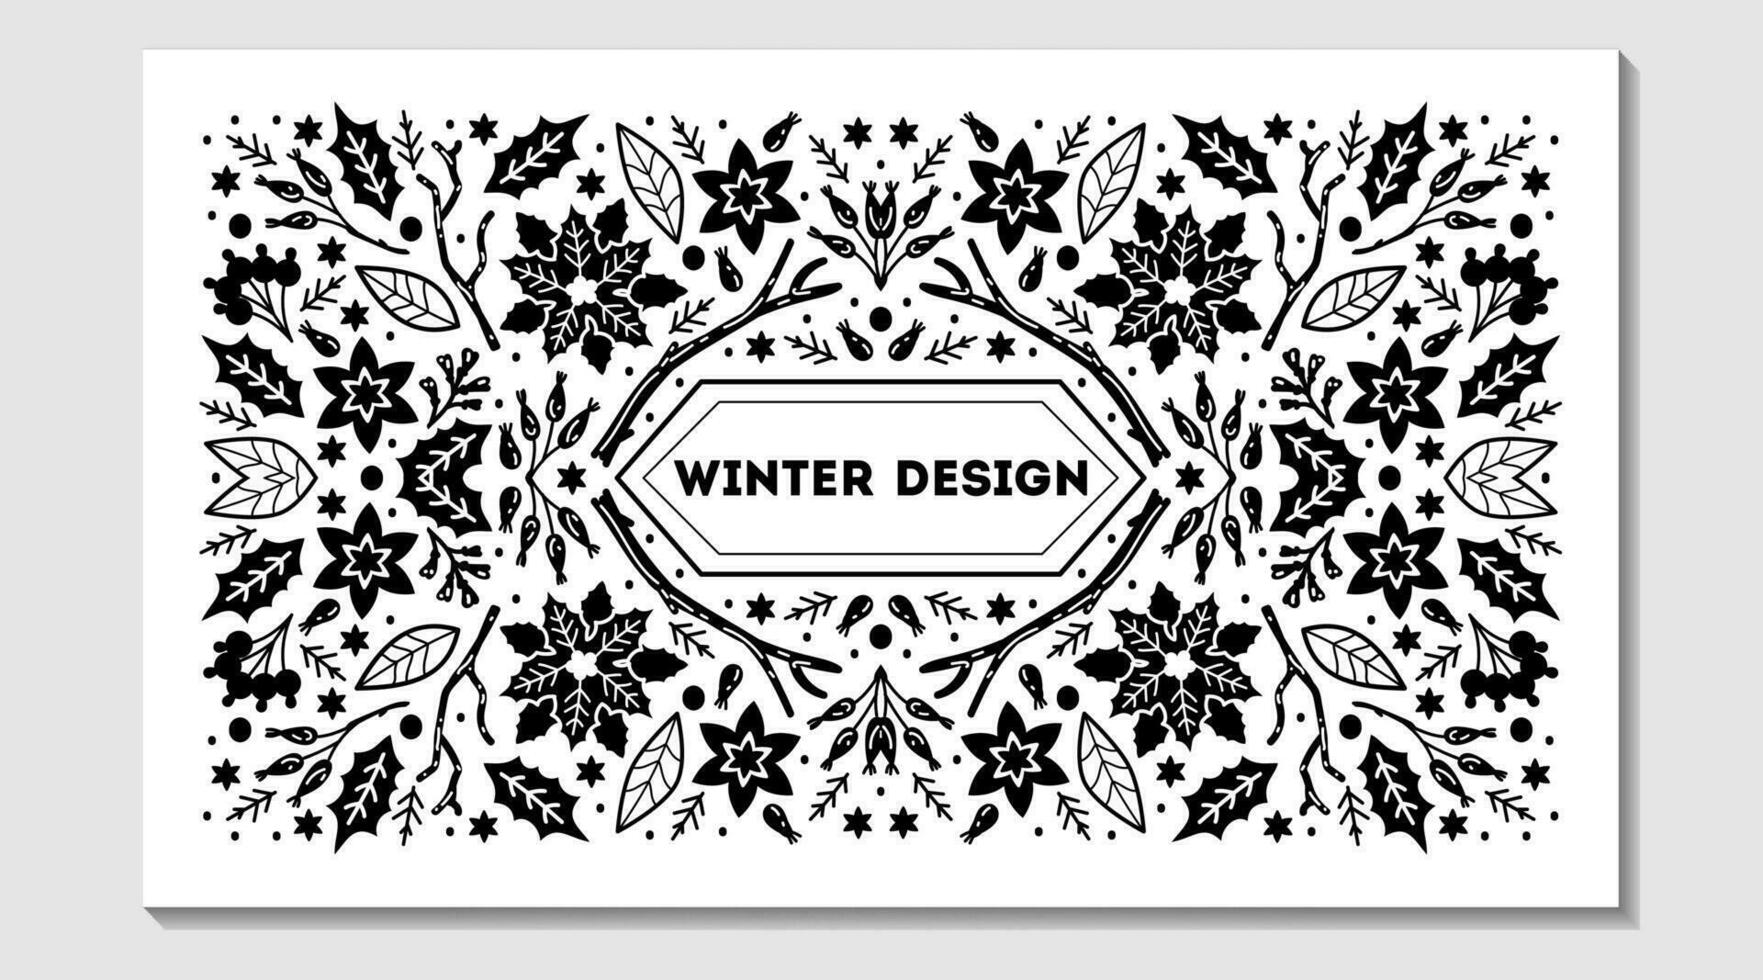 Luxury Christmas frame, abstract sketch winter design templates for package vector